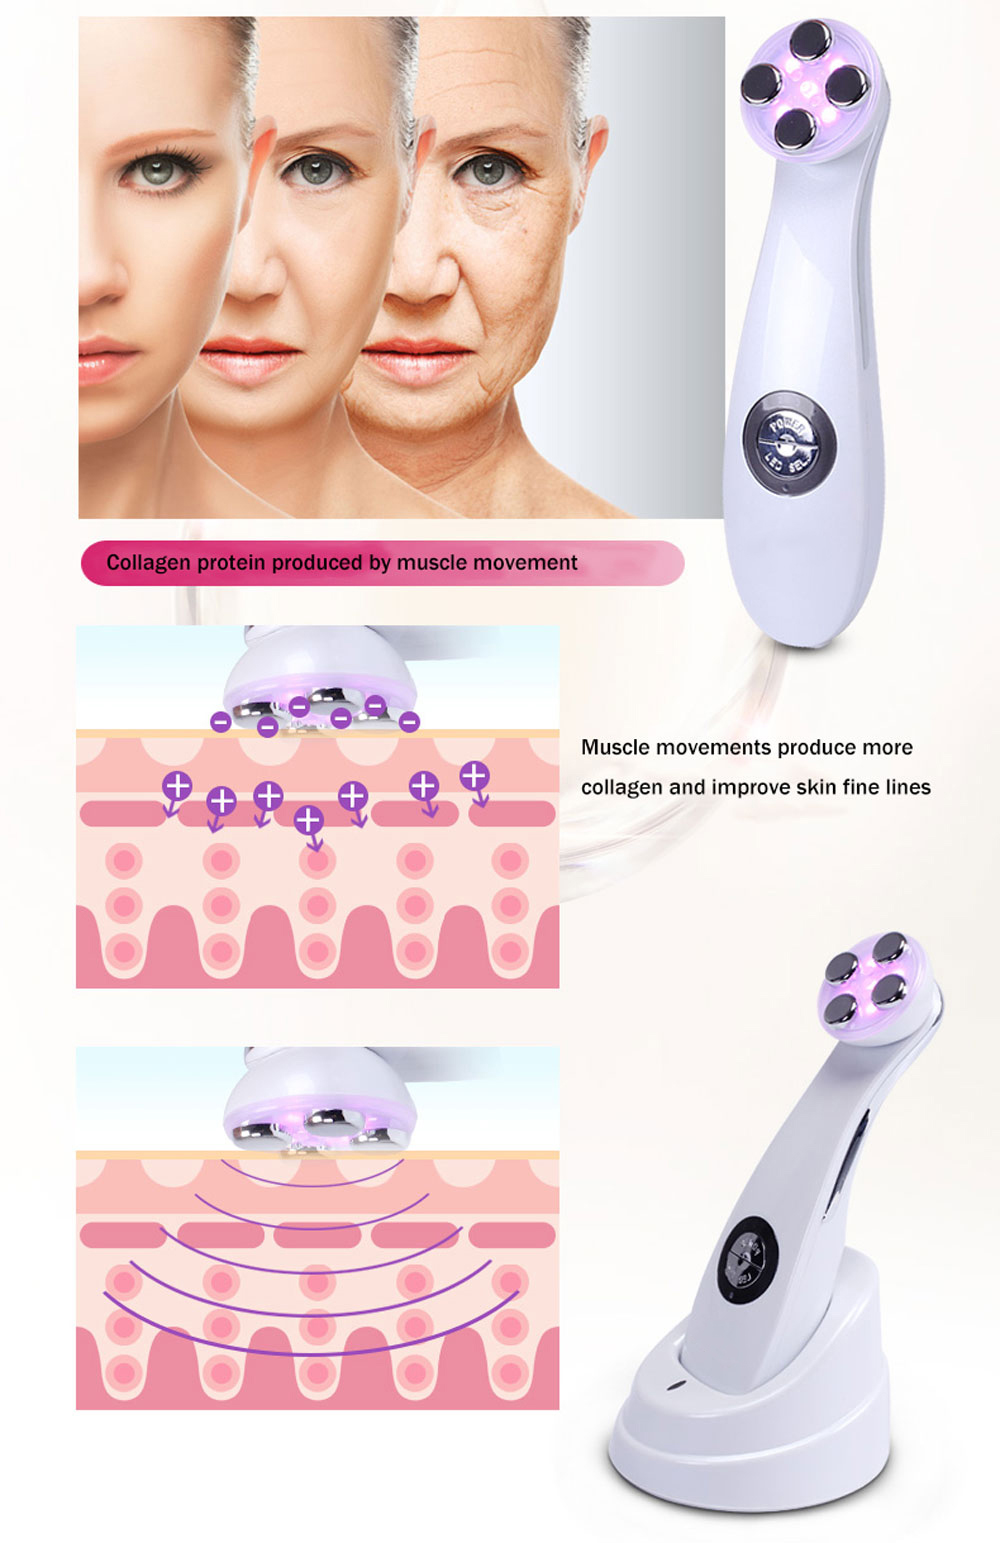 K_SKIN Mesoporation Electroporation LED Photon Radio Frequency Face Lifting Tightening Facial Skin Massager